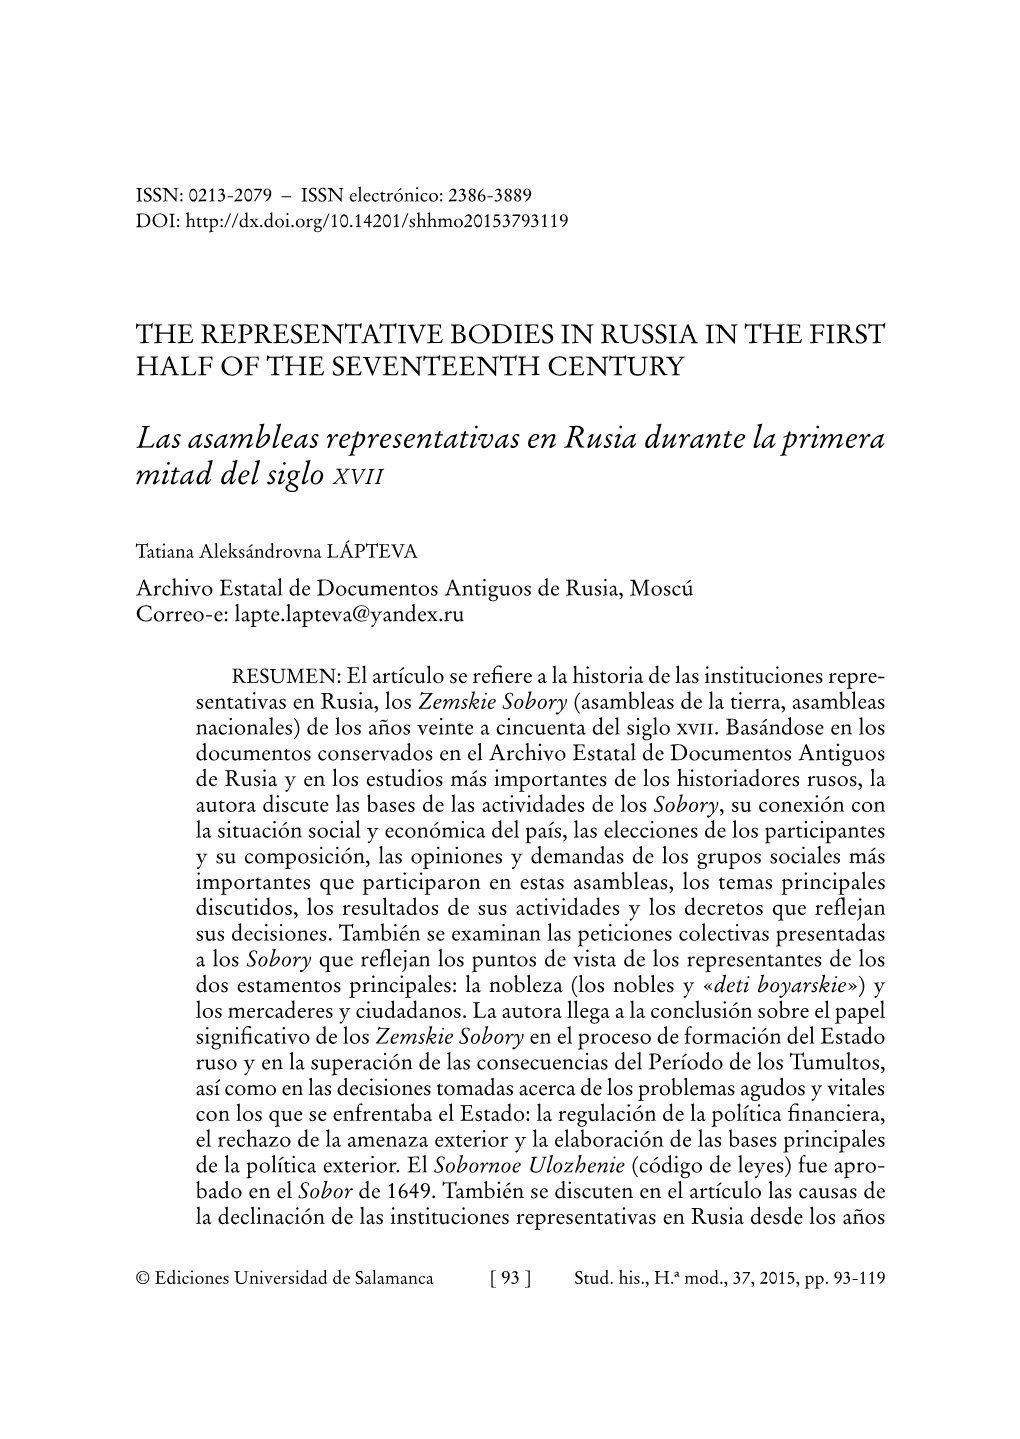 The Representative Bodies in Russia in the First Half of the Seventeenth Century